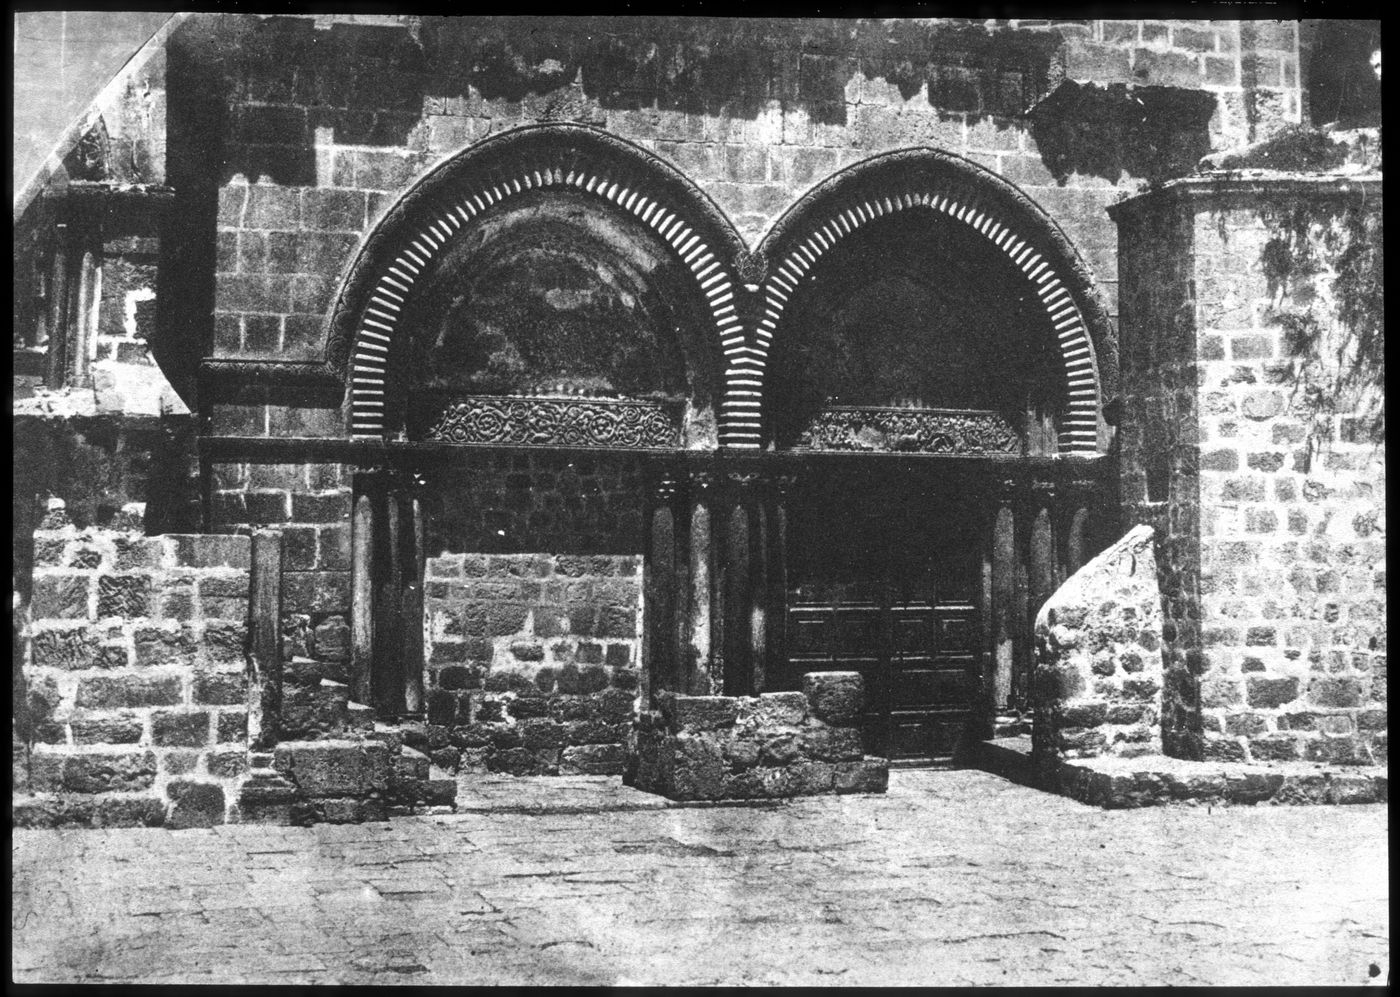 Church of the Holy Sepulchre, view of main entrance, Jerusalem, Palestine